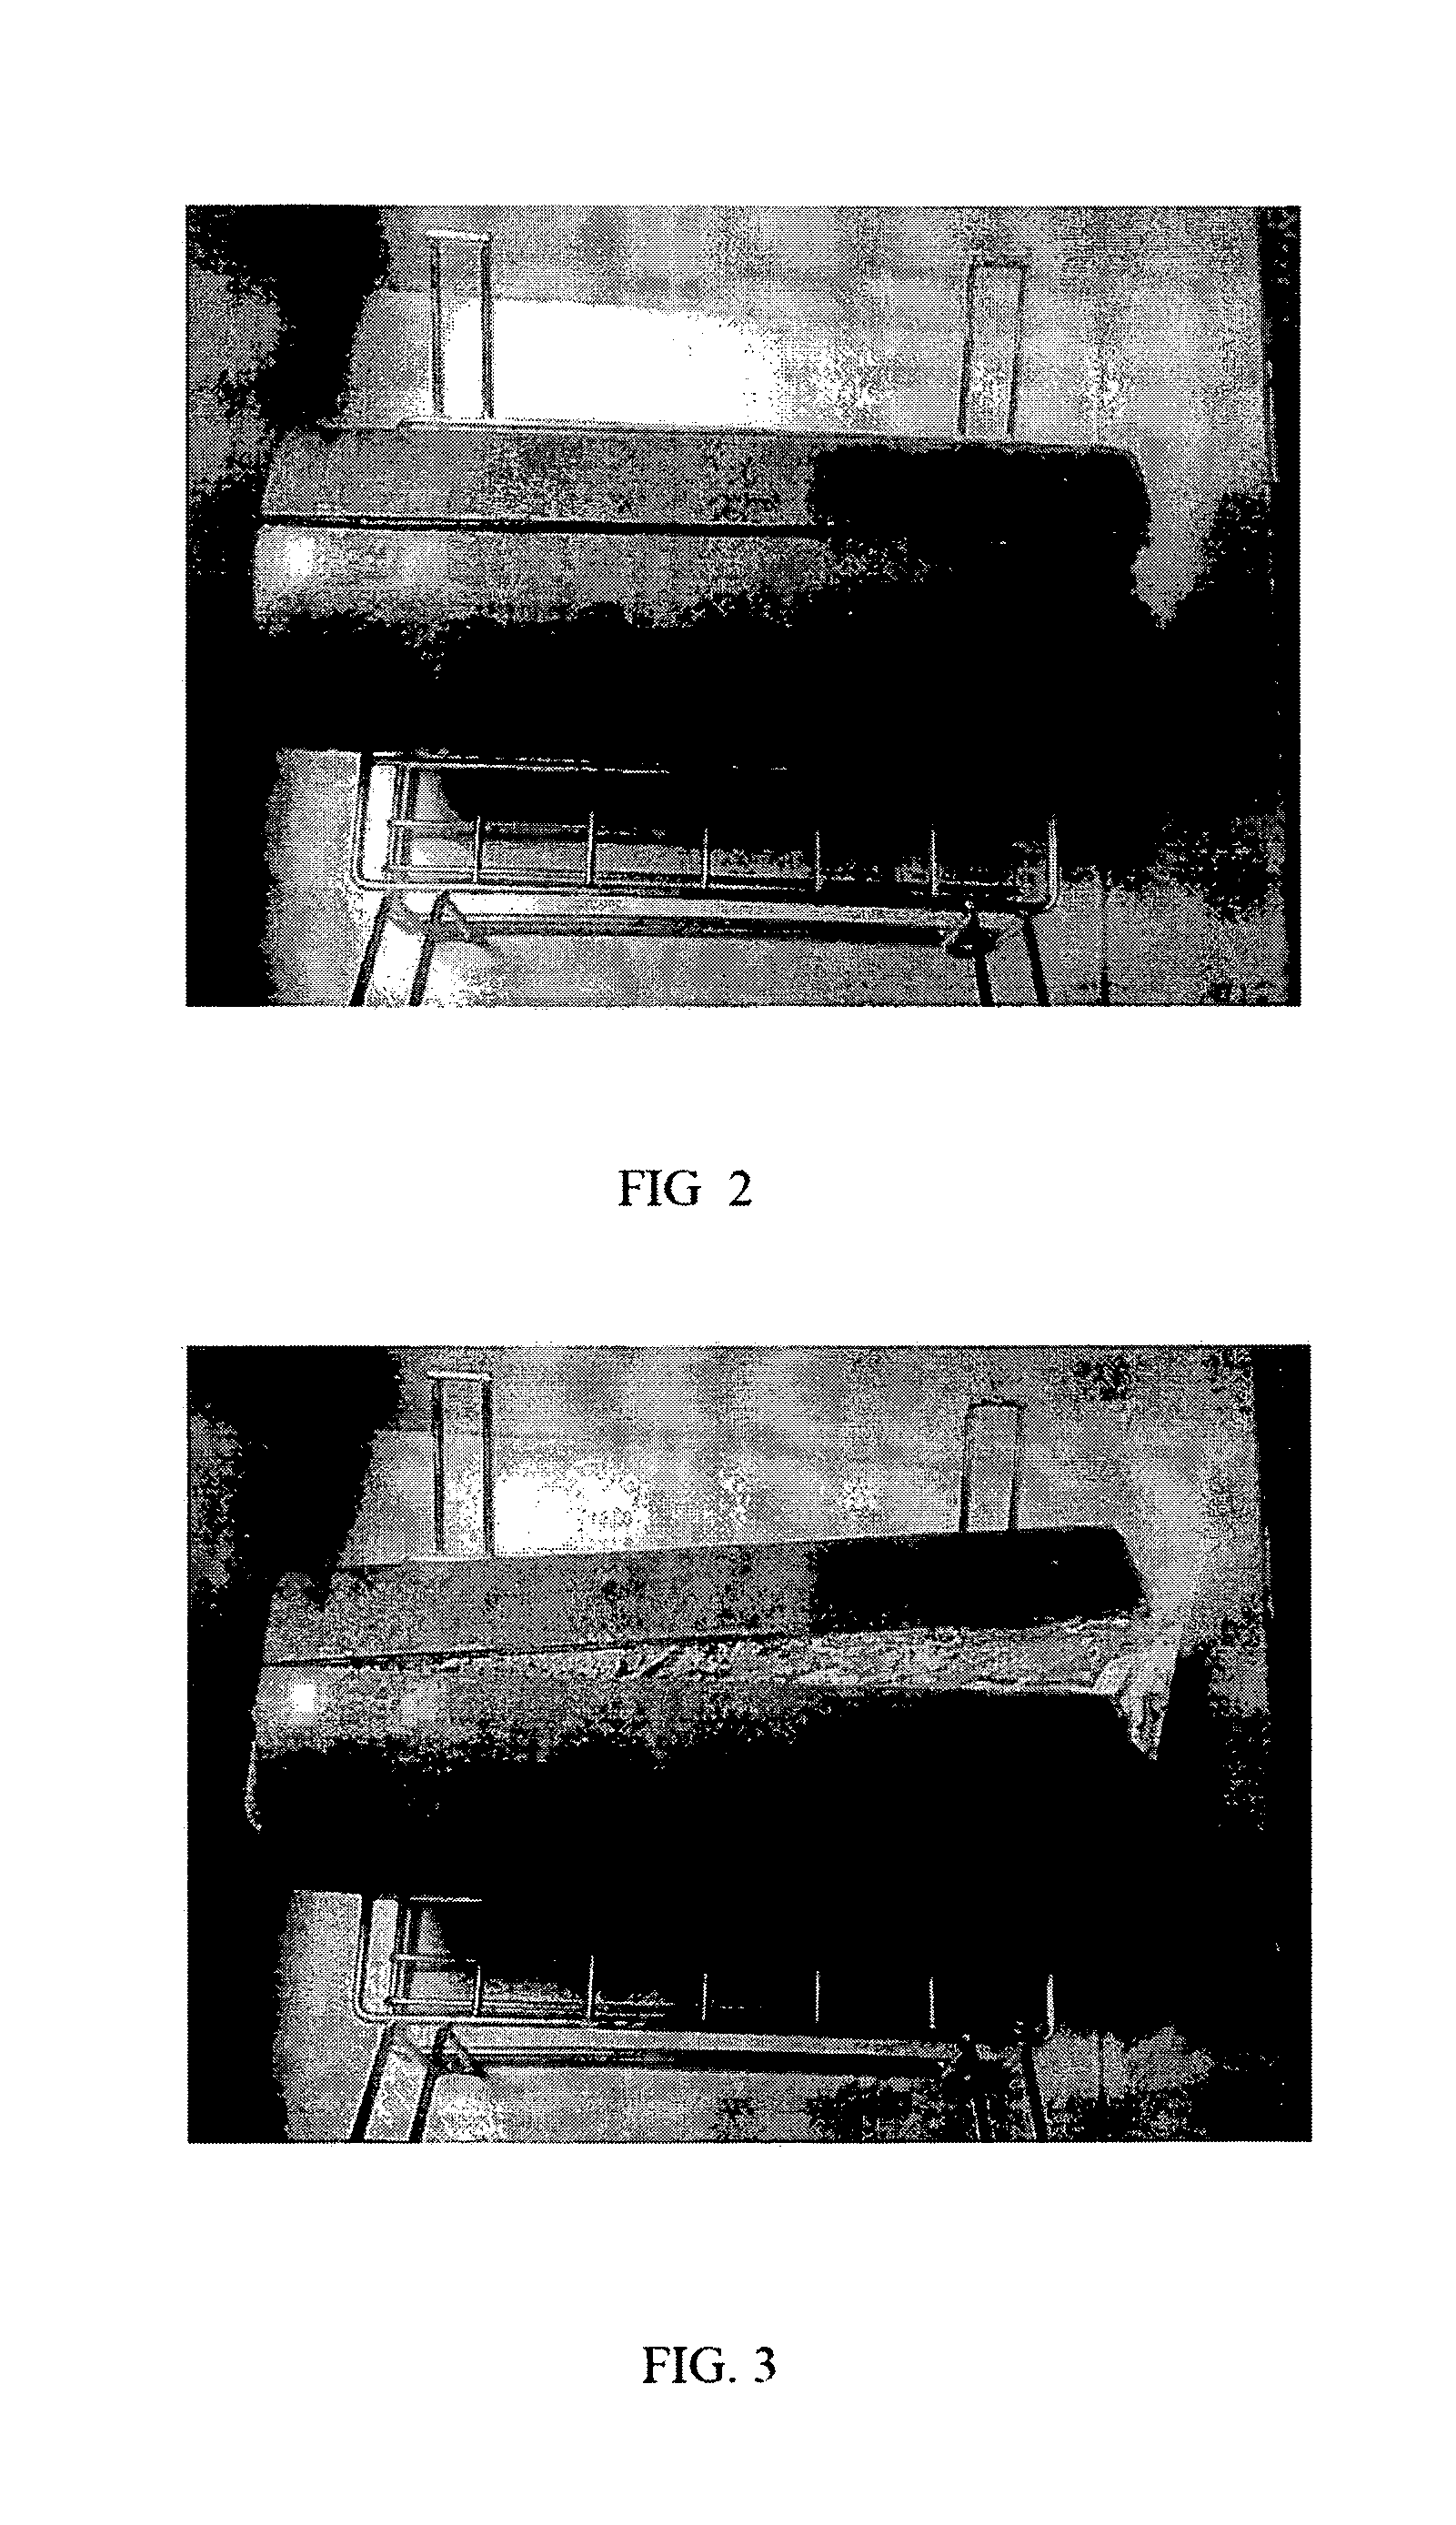 Method of treating a structure containing sodium and a radioactive substance